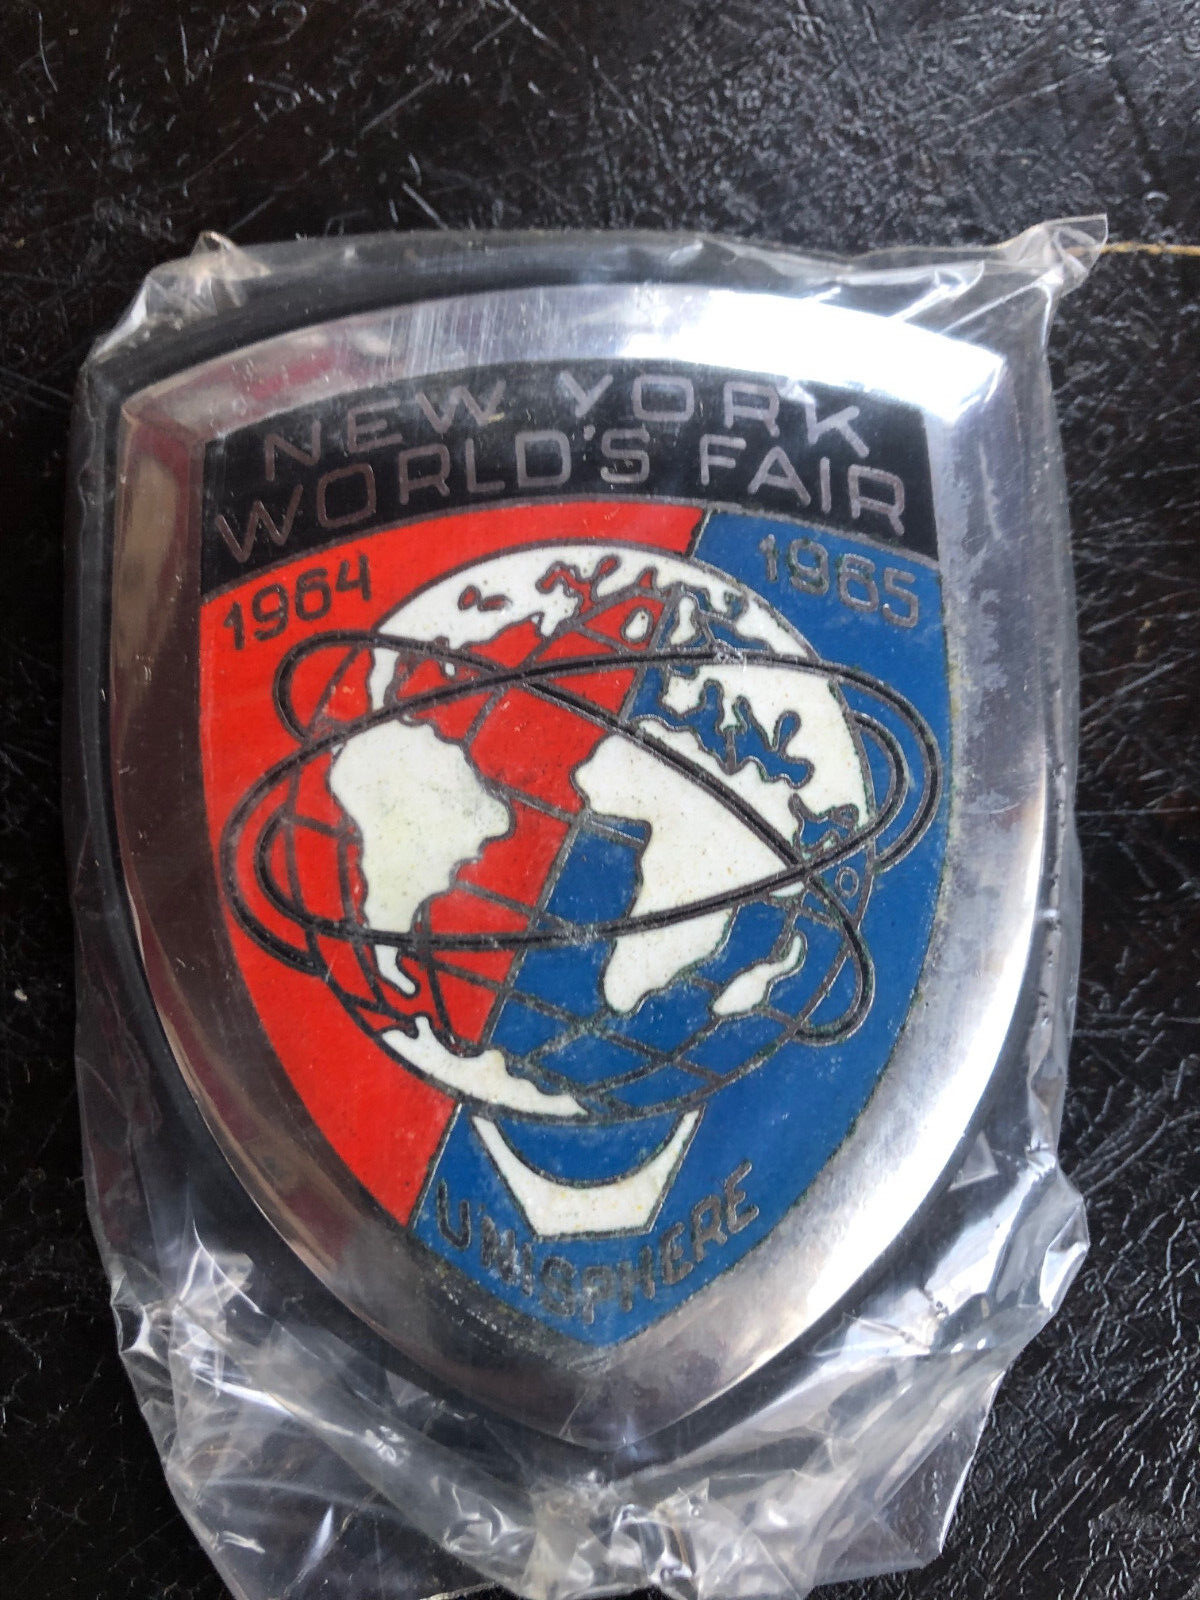 Original New Old Stock World's Fair car grille/scooter badge 1964-1965